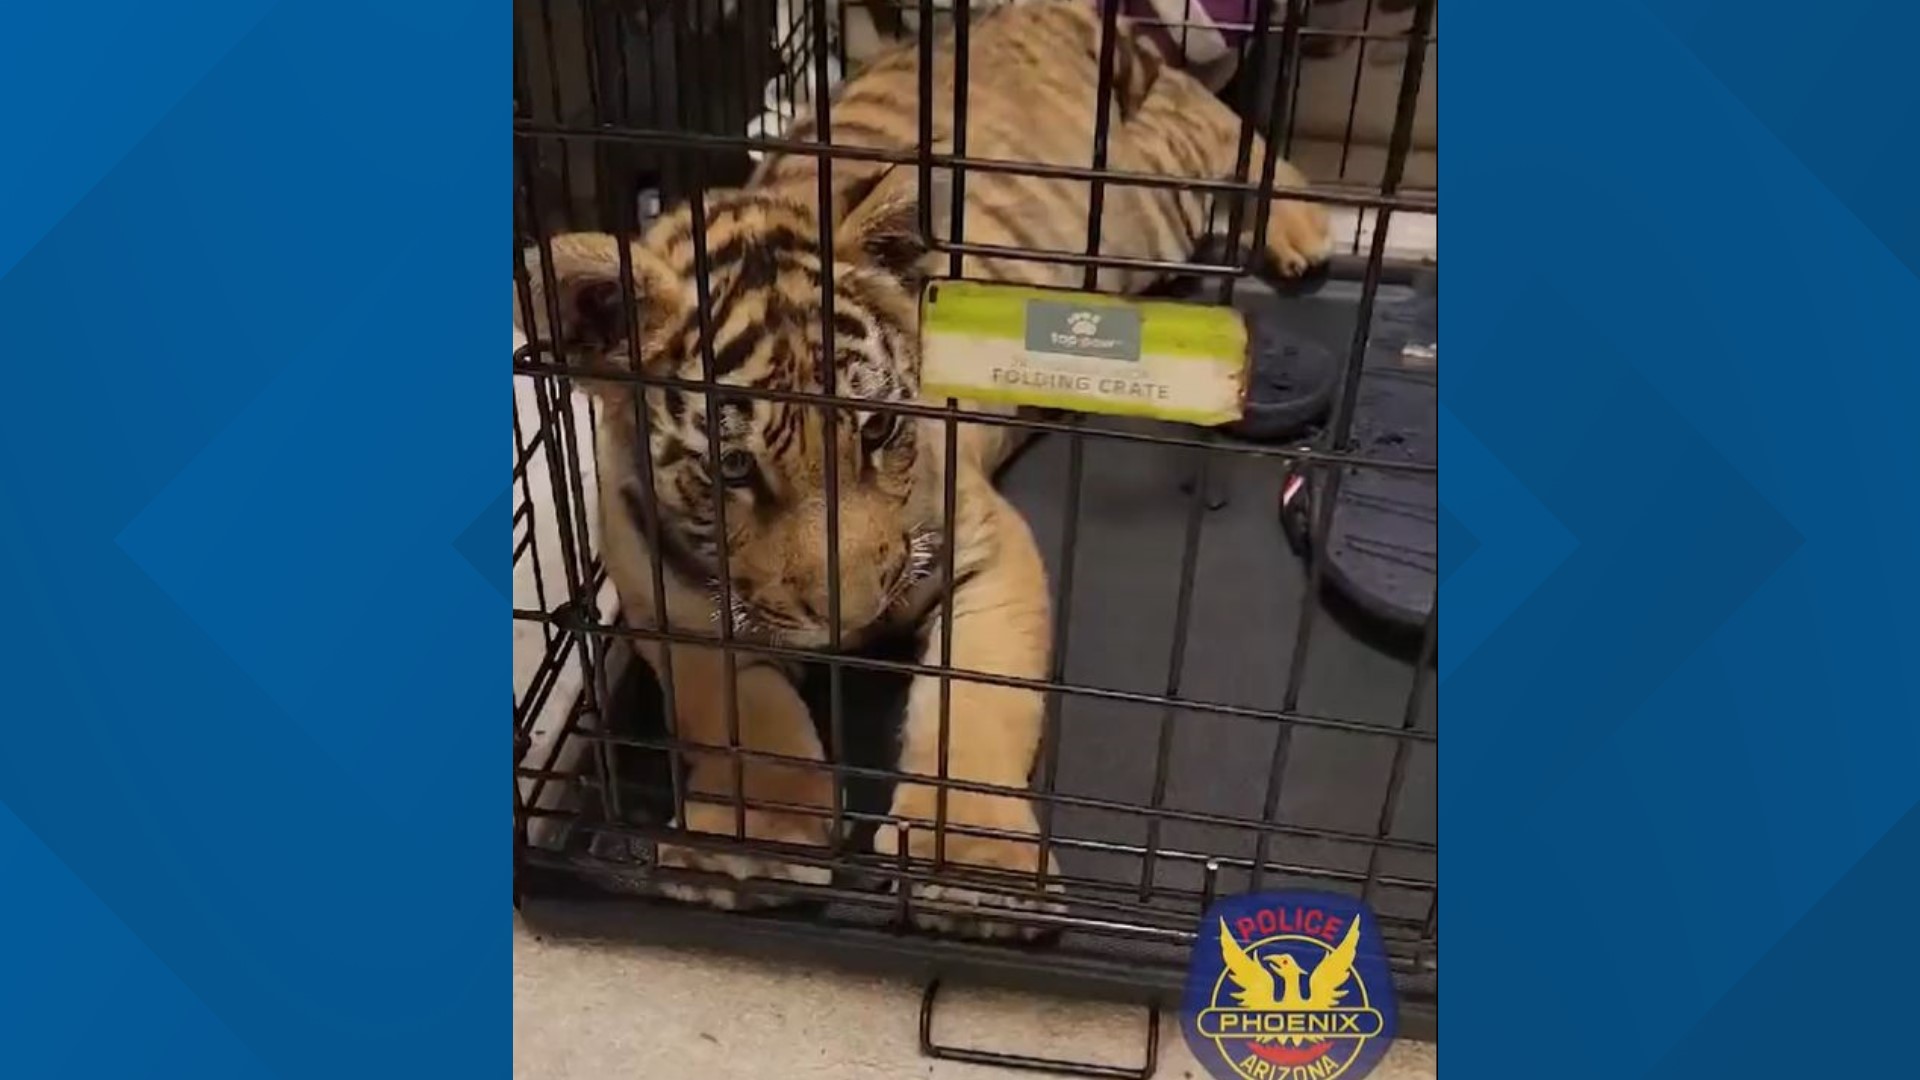 The 25-year-old suspect was booked into the Maricopa County jail and the tiger was turned over to U.S. Fish and Wildlife Service.